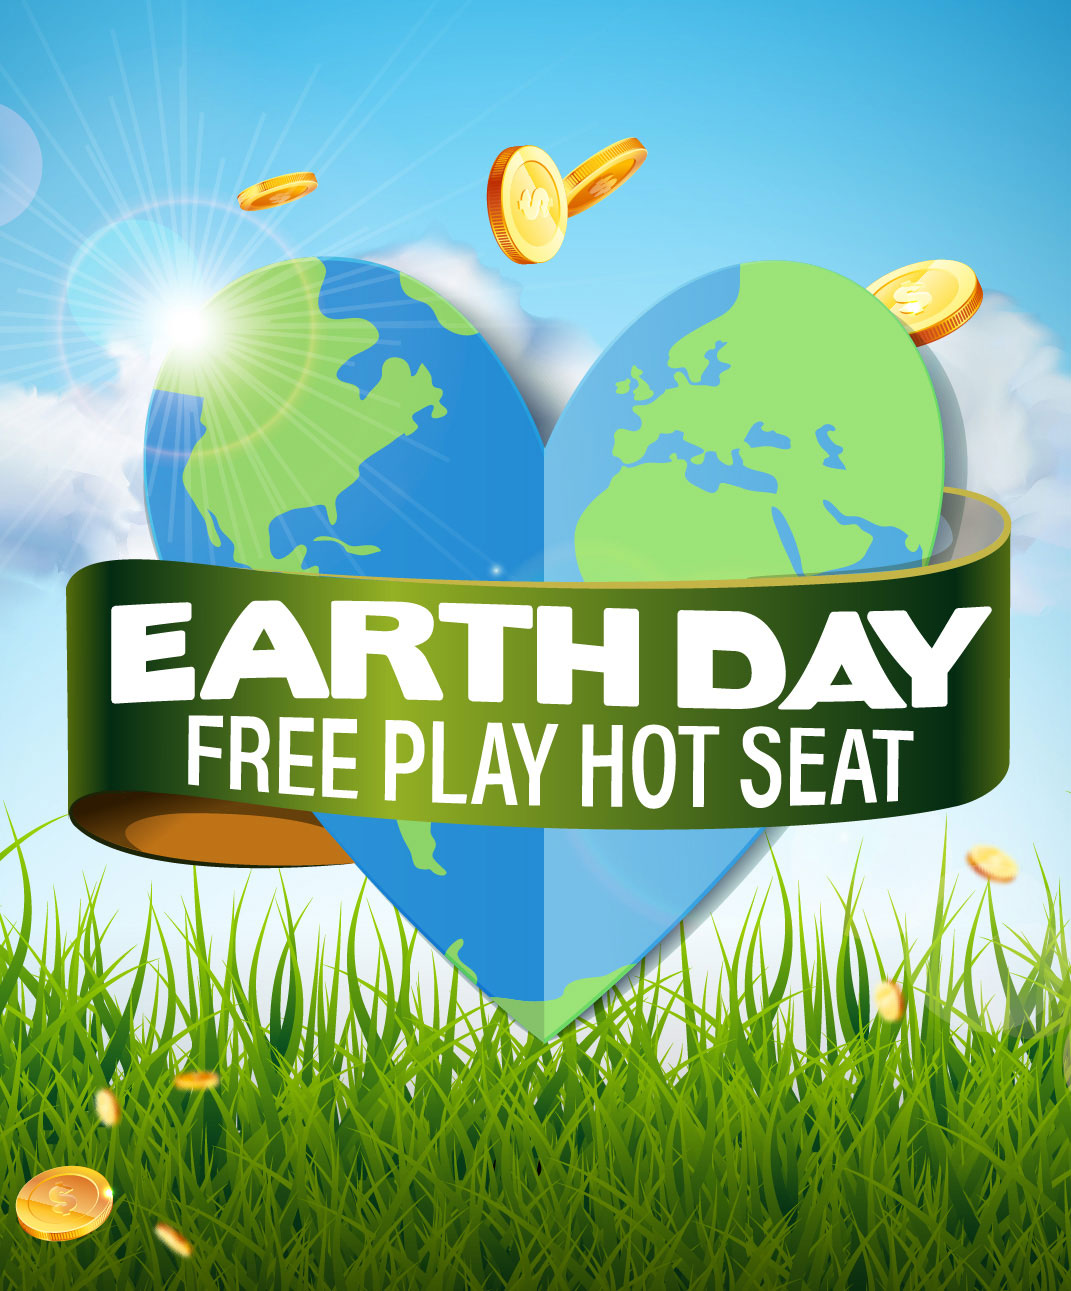 Earth Day Free Play Hot Seat